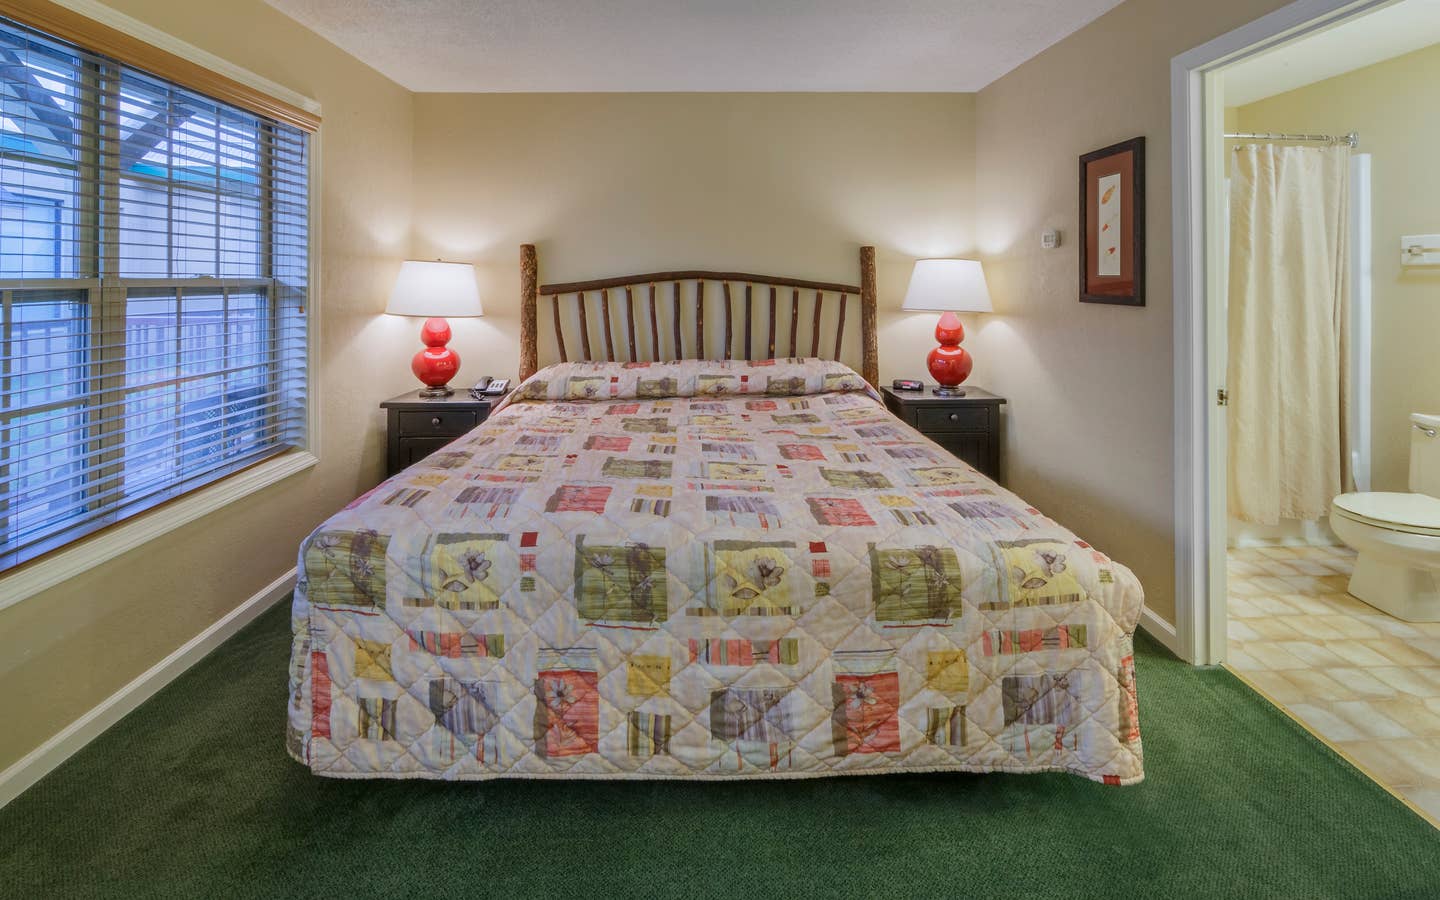 King bed in a bedroom of a three bedroom villa at Oak n' Spruce Resort in South Lee, Massachusetts